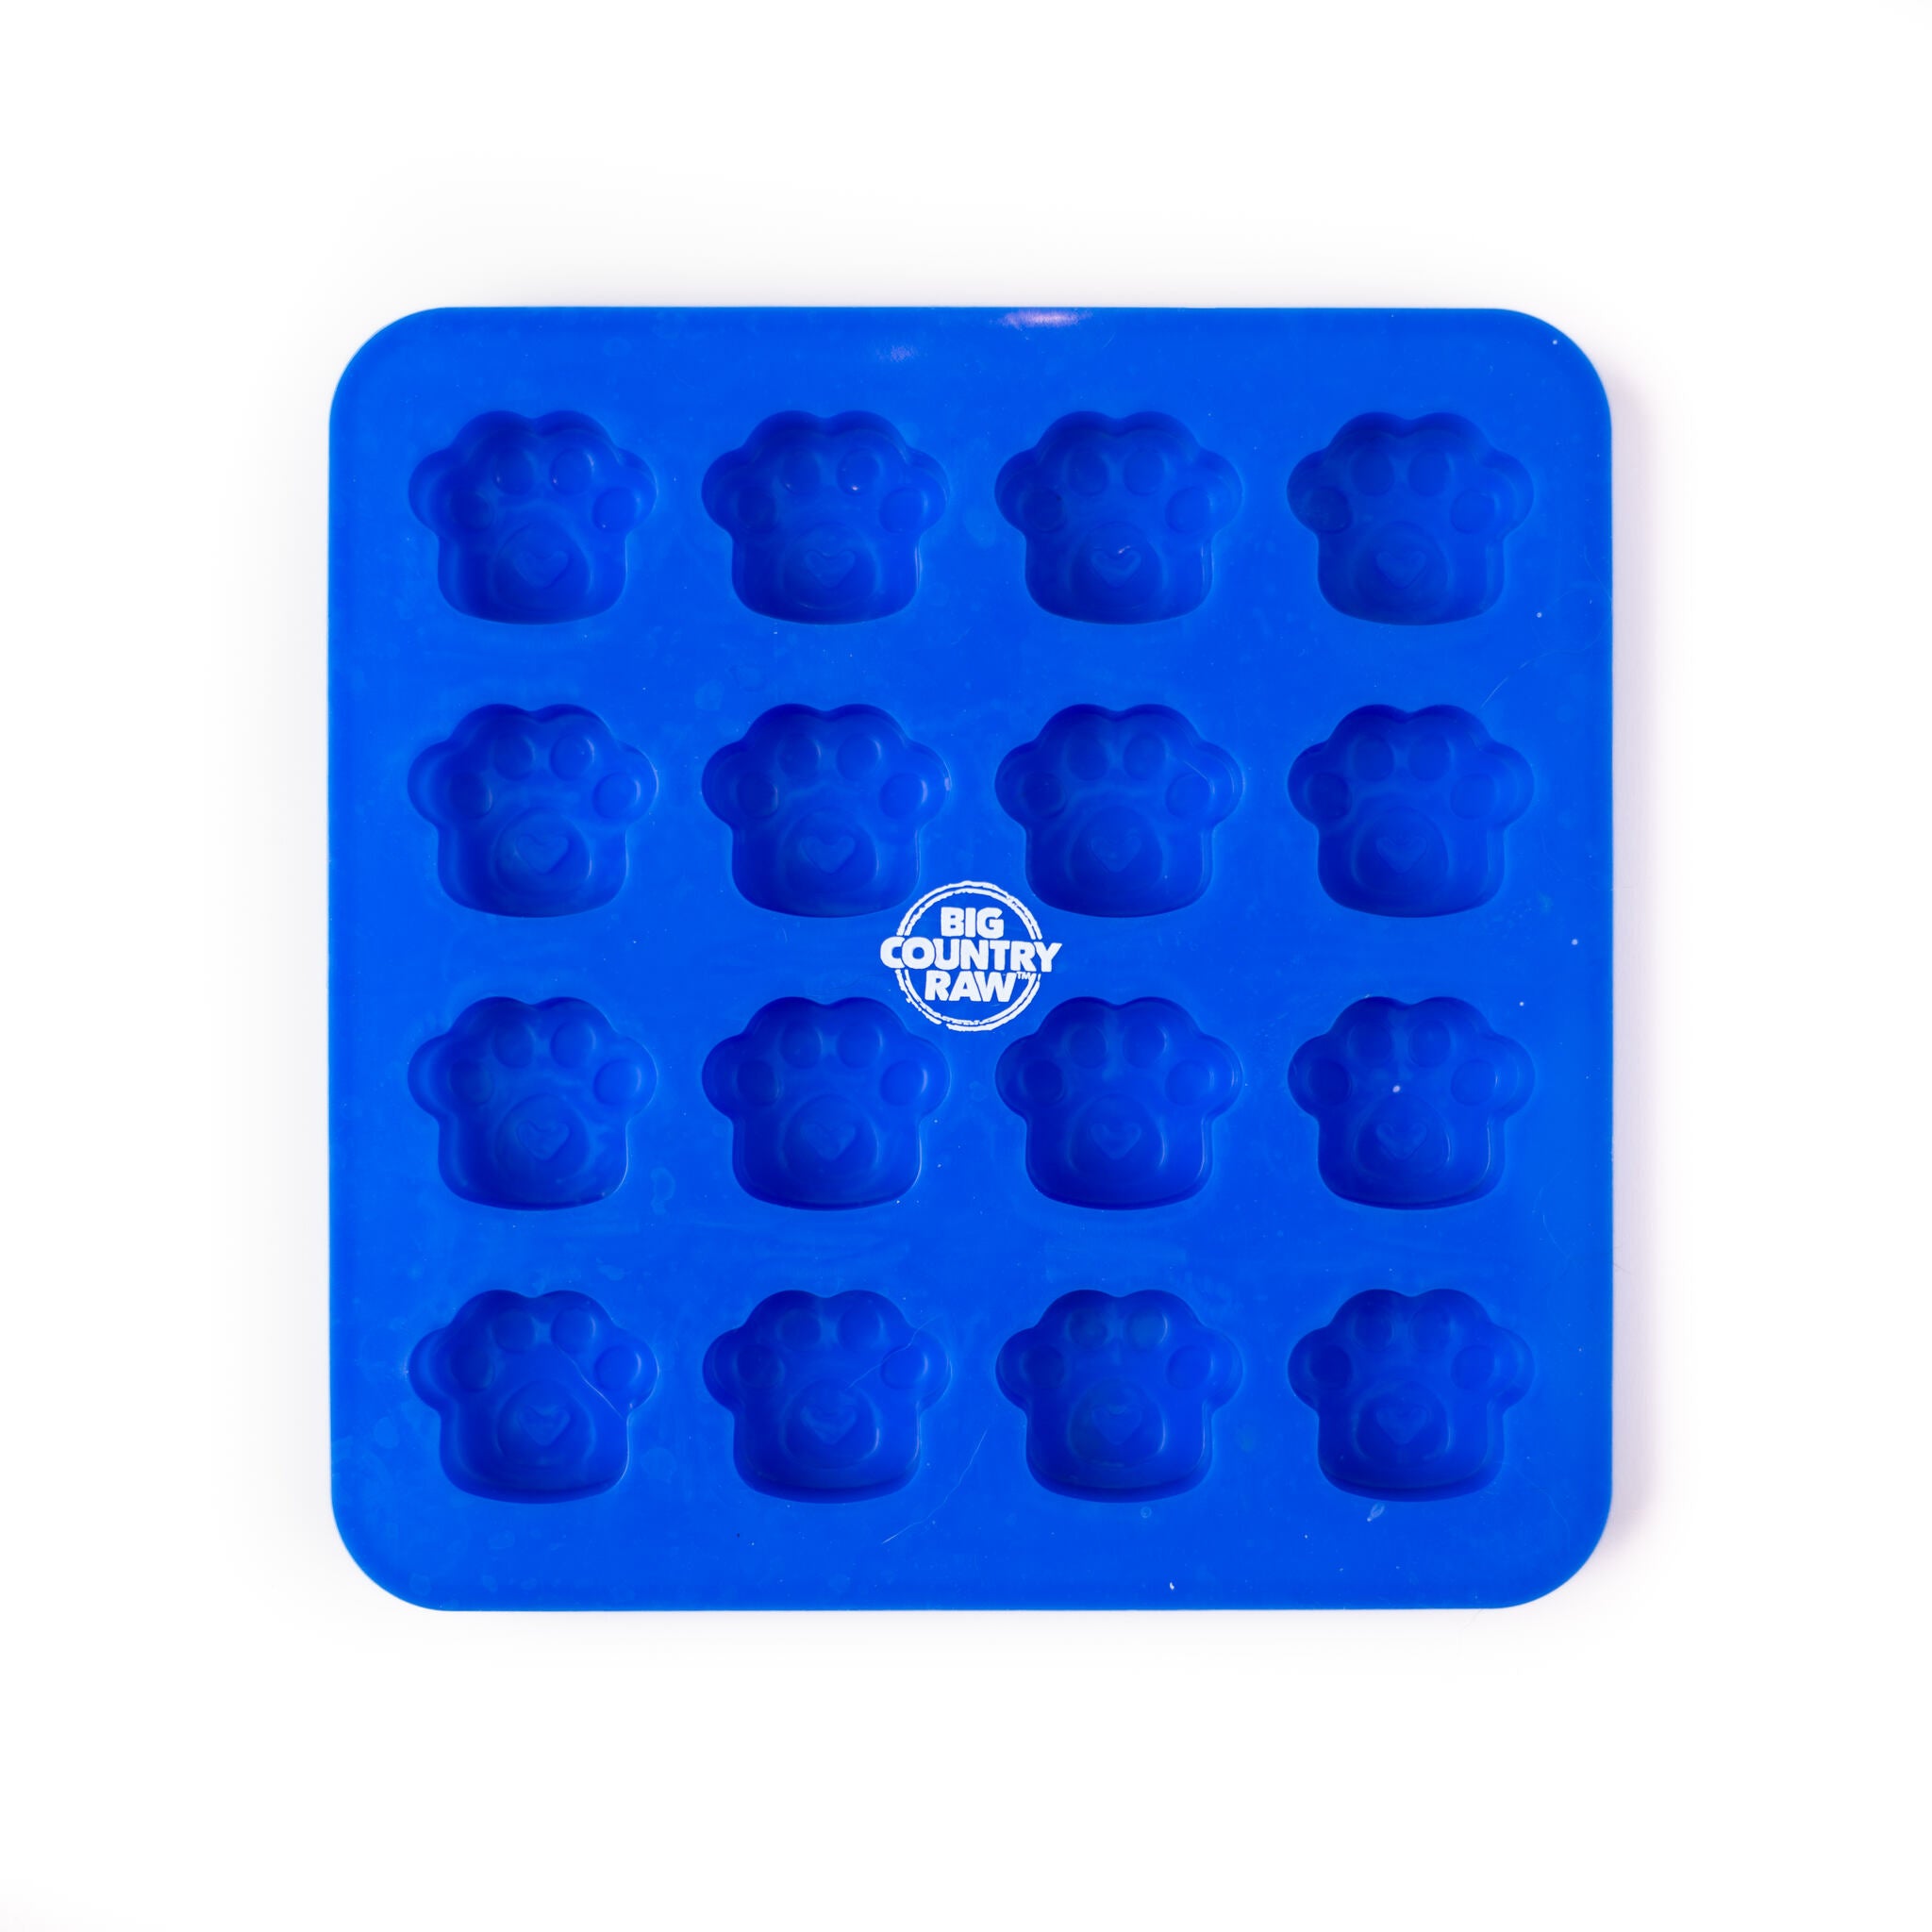 A Big Country Raw Freeze mold, paw pattern, blue with 16 spaces for small paw molds.